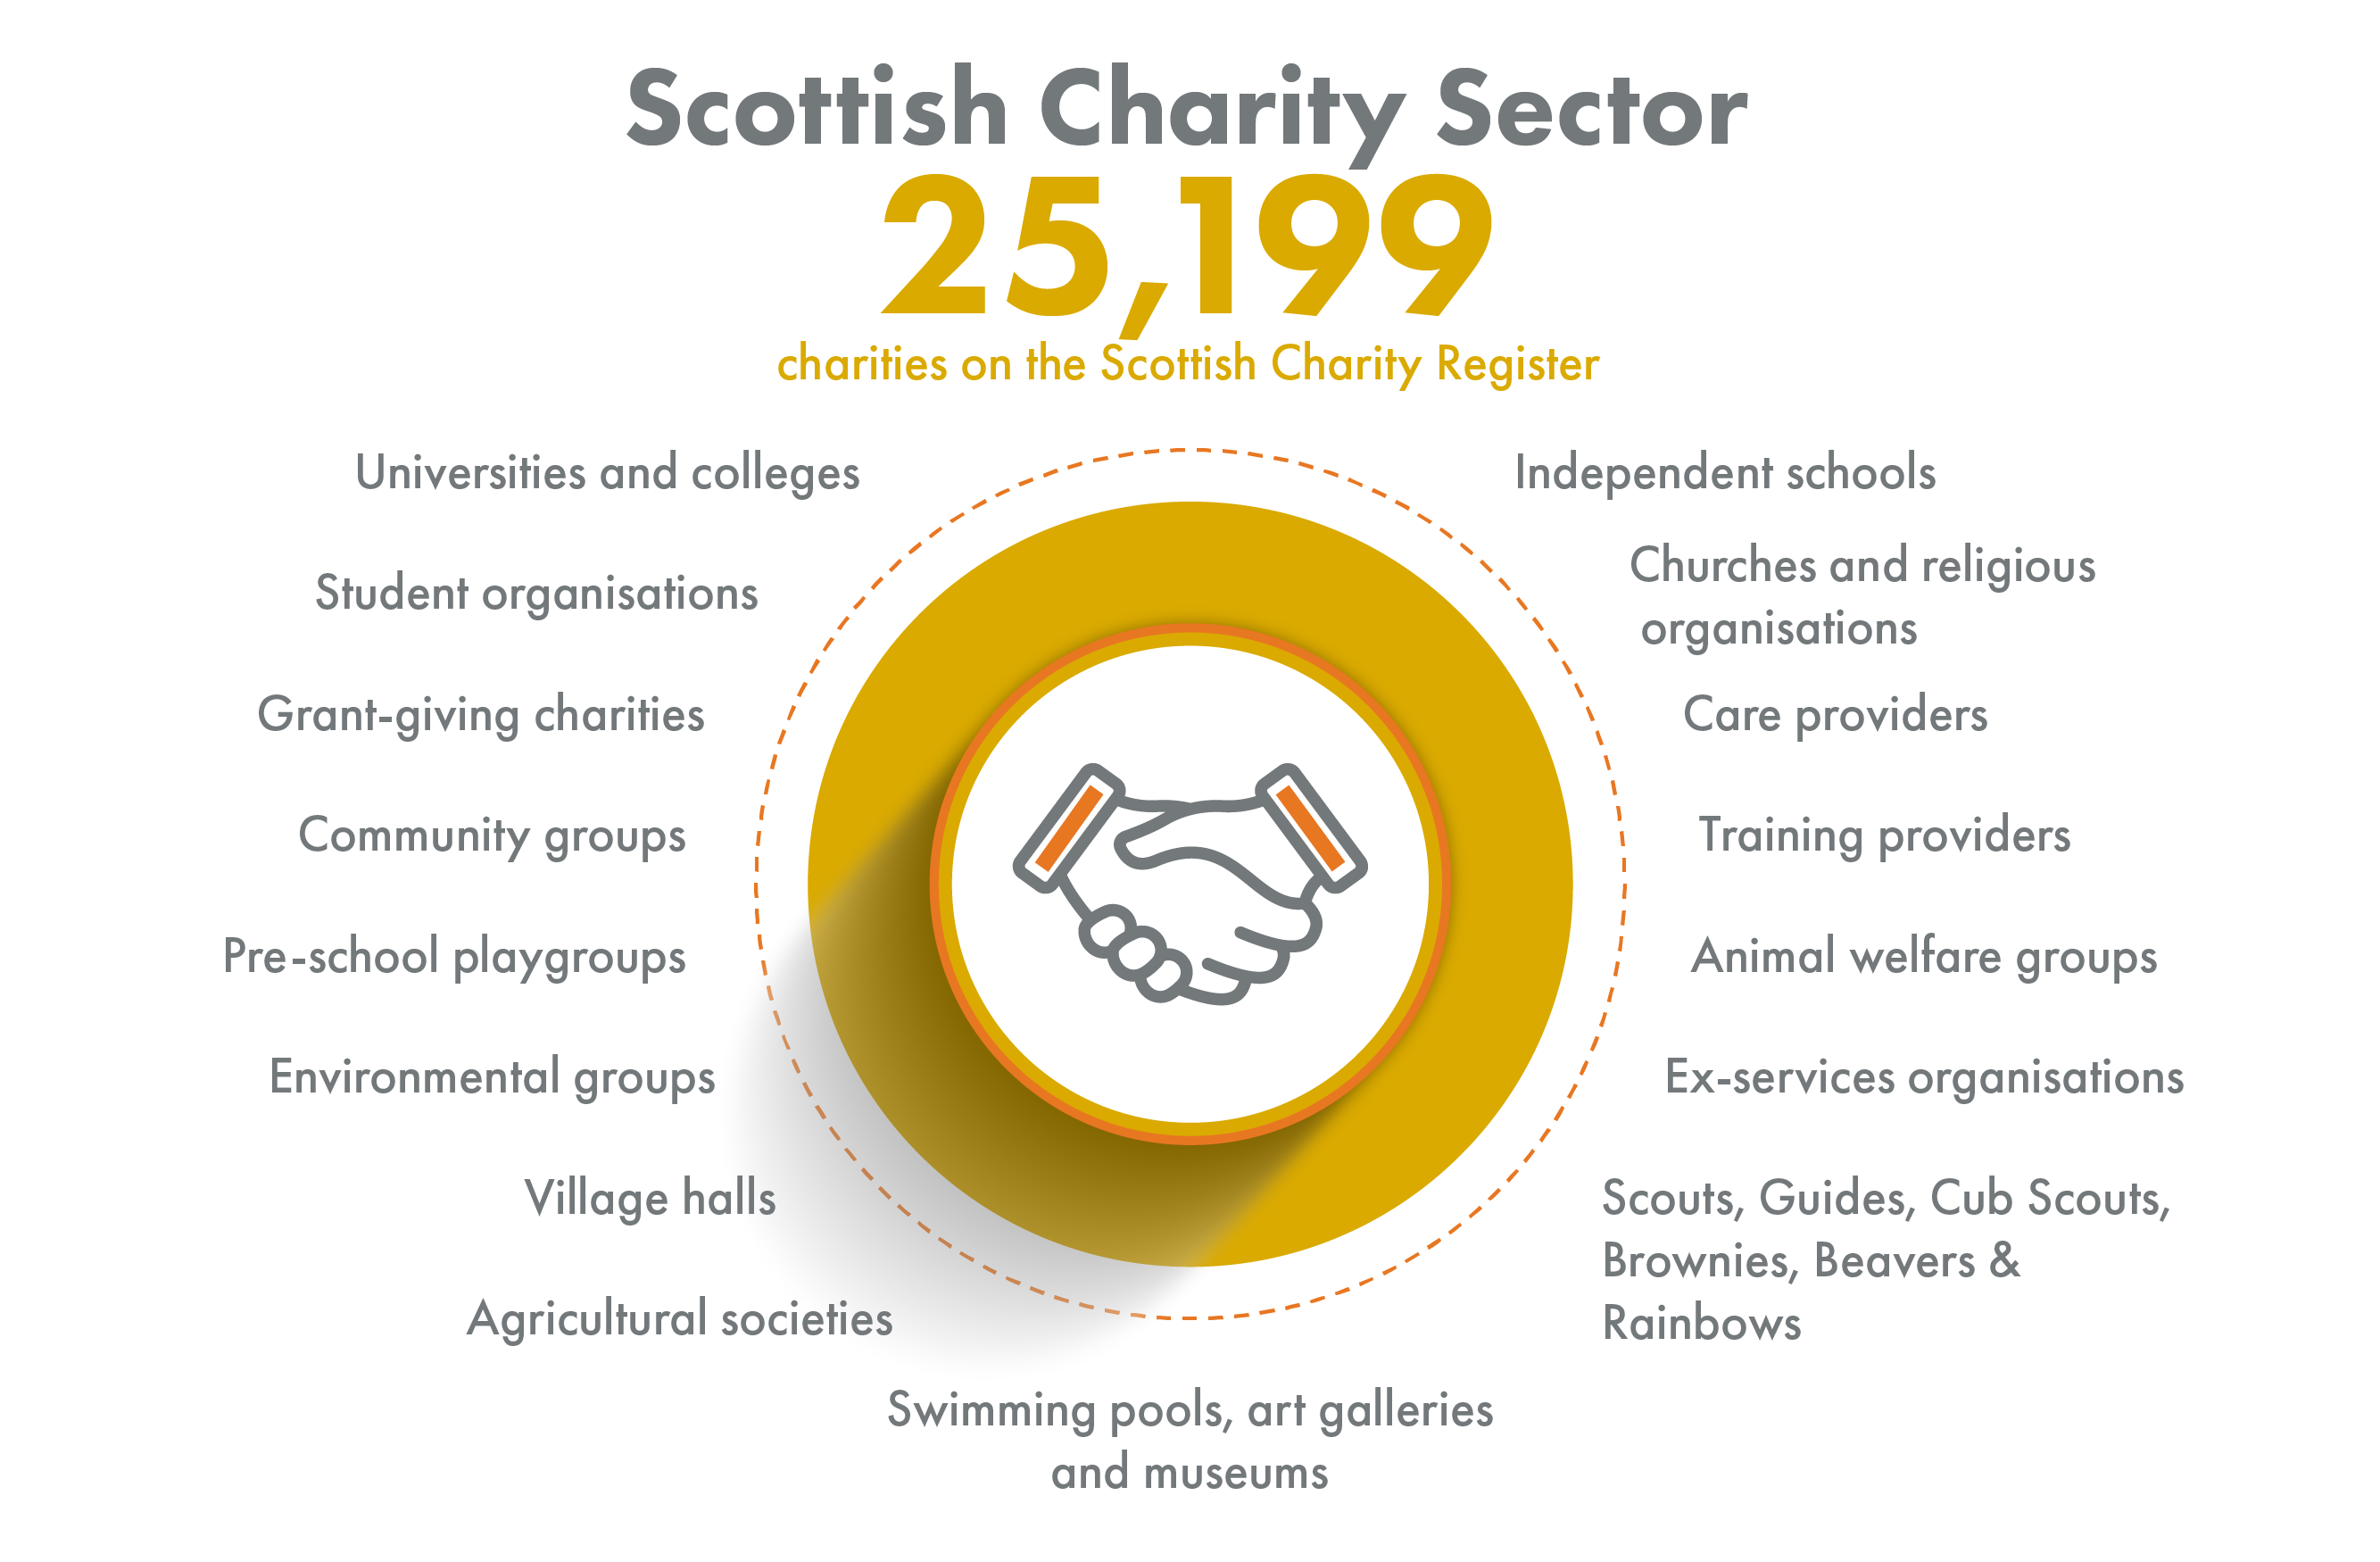 Image showing number of charities and different types of charities